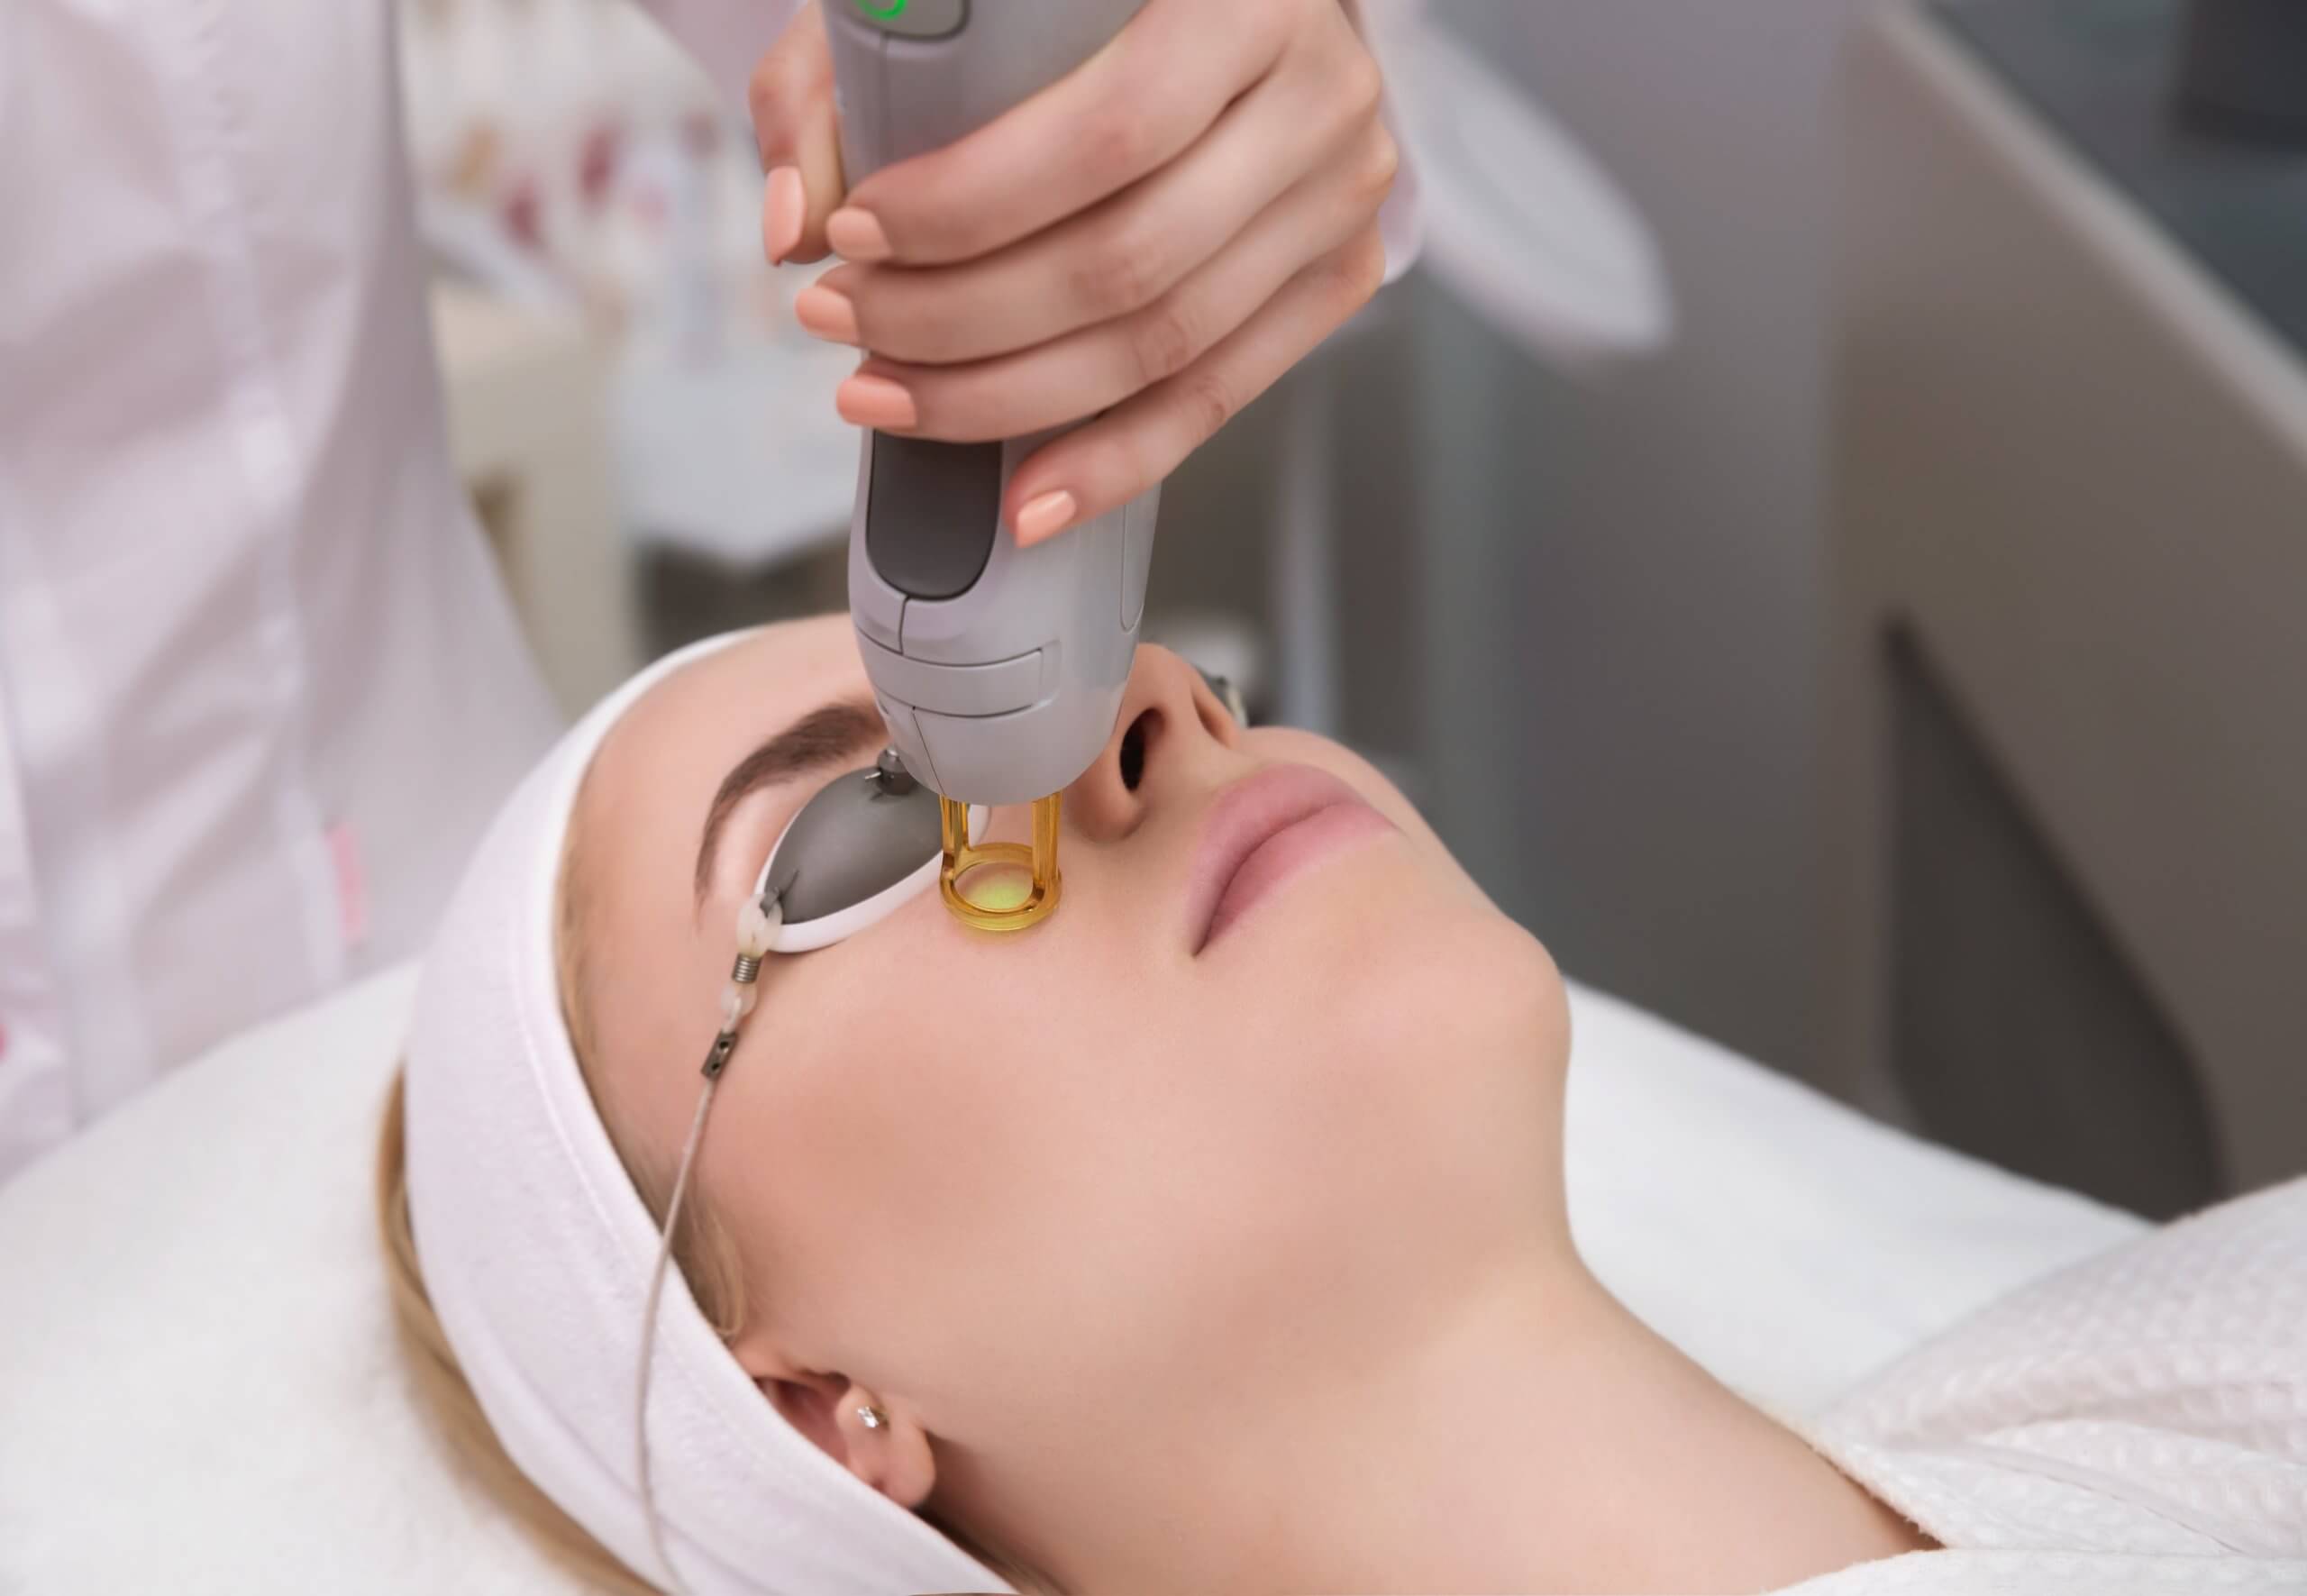 The BBL laser treatment process What to expect during and after the procedure